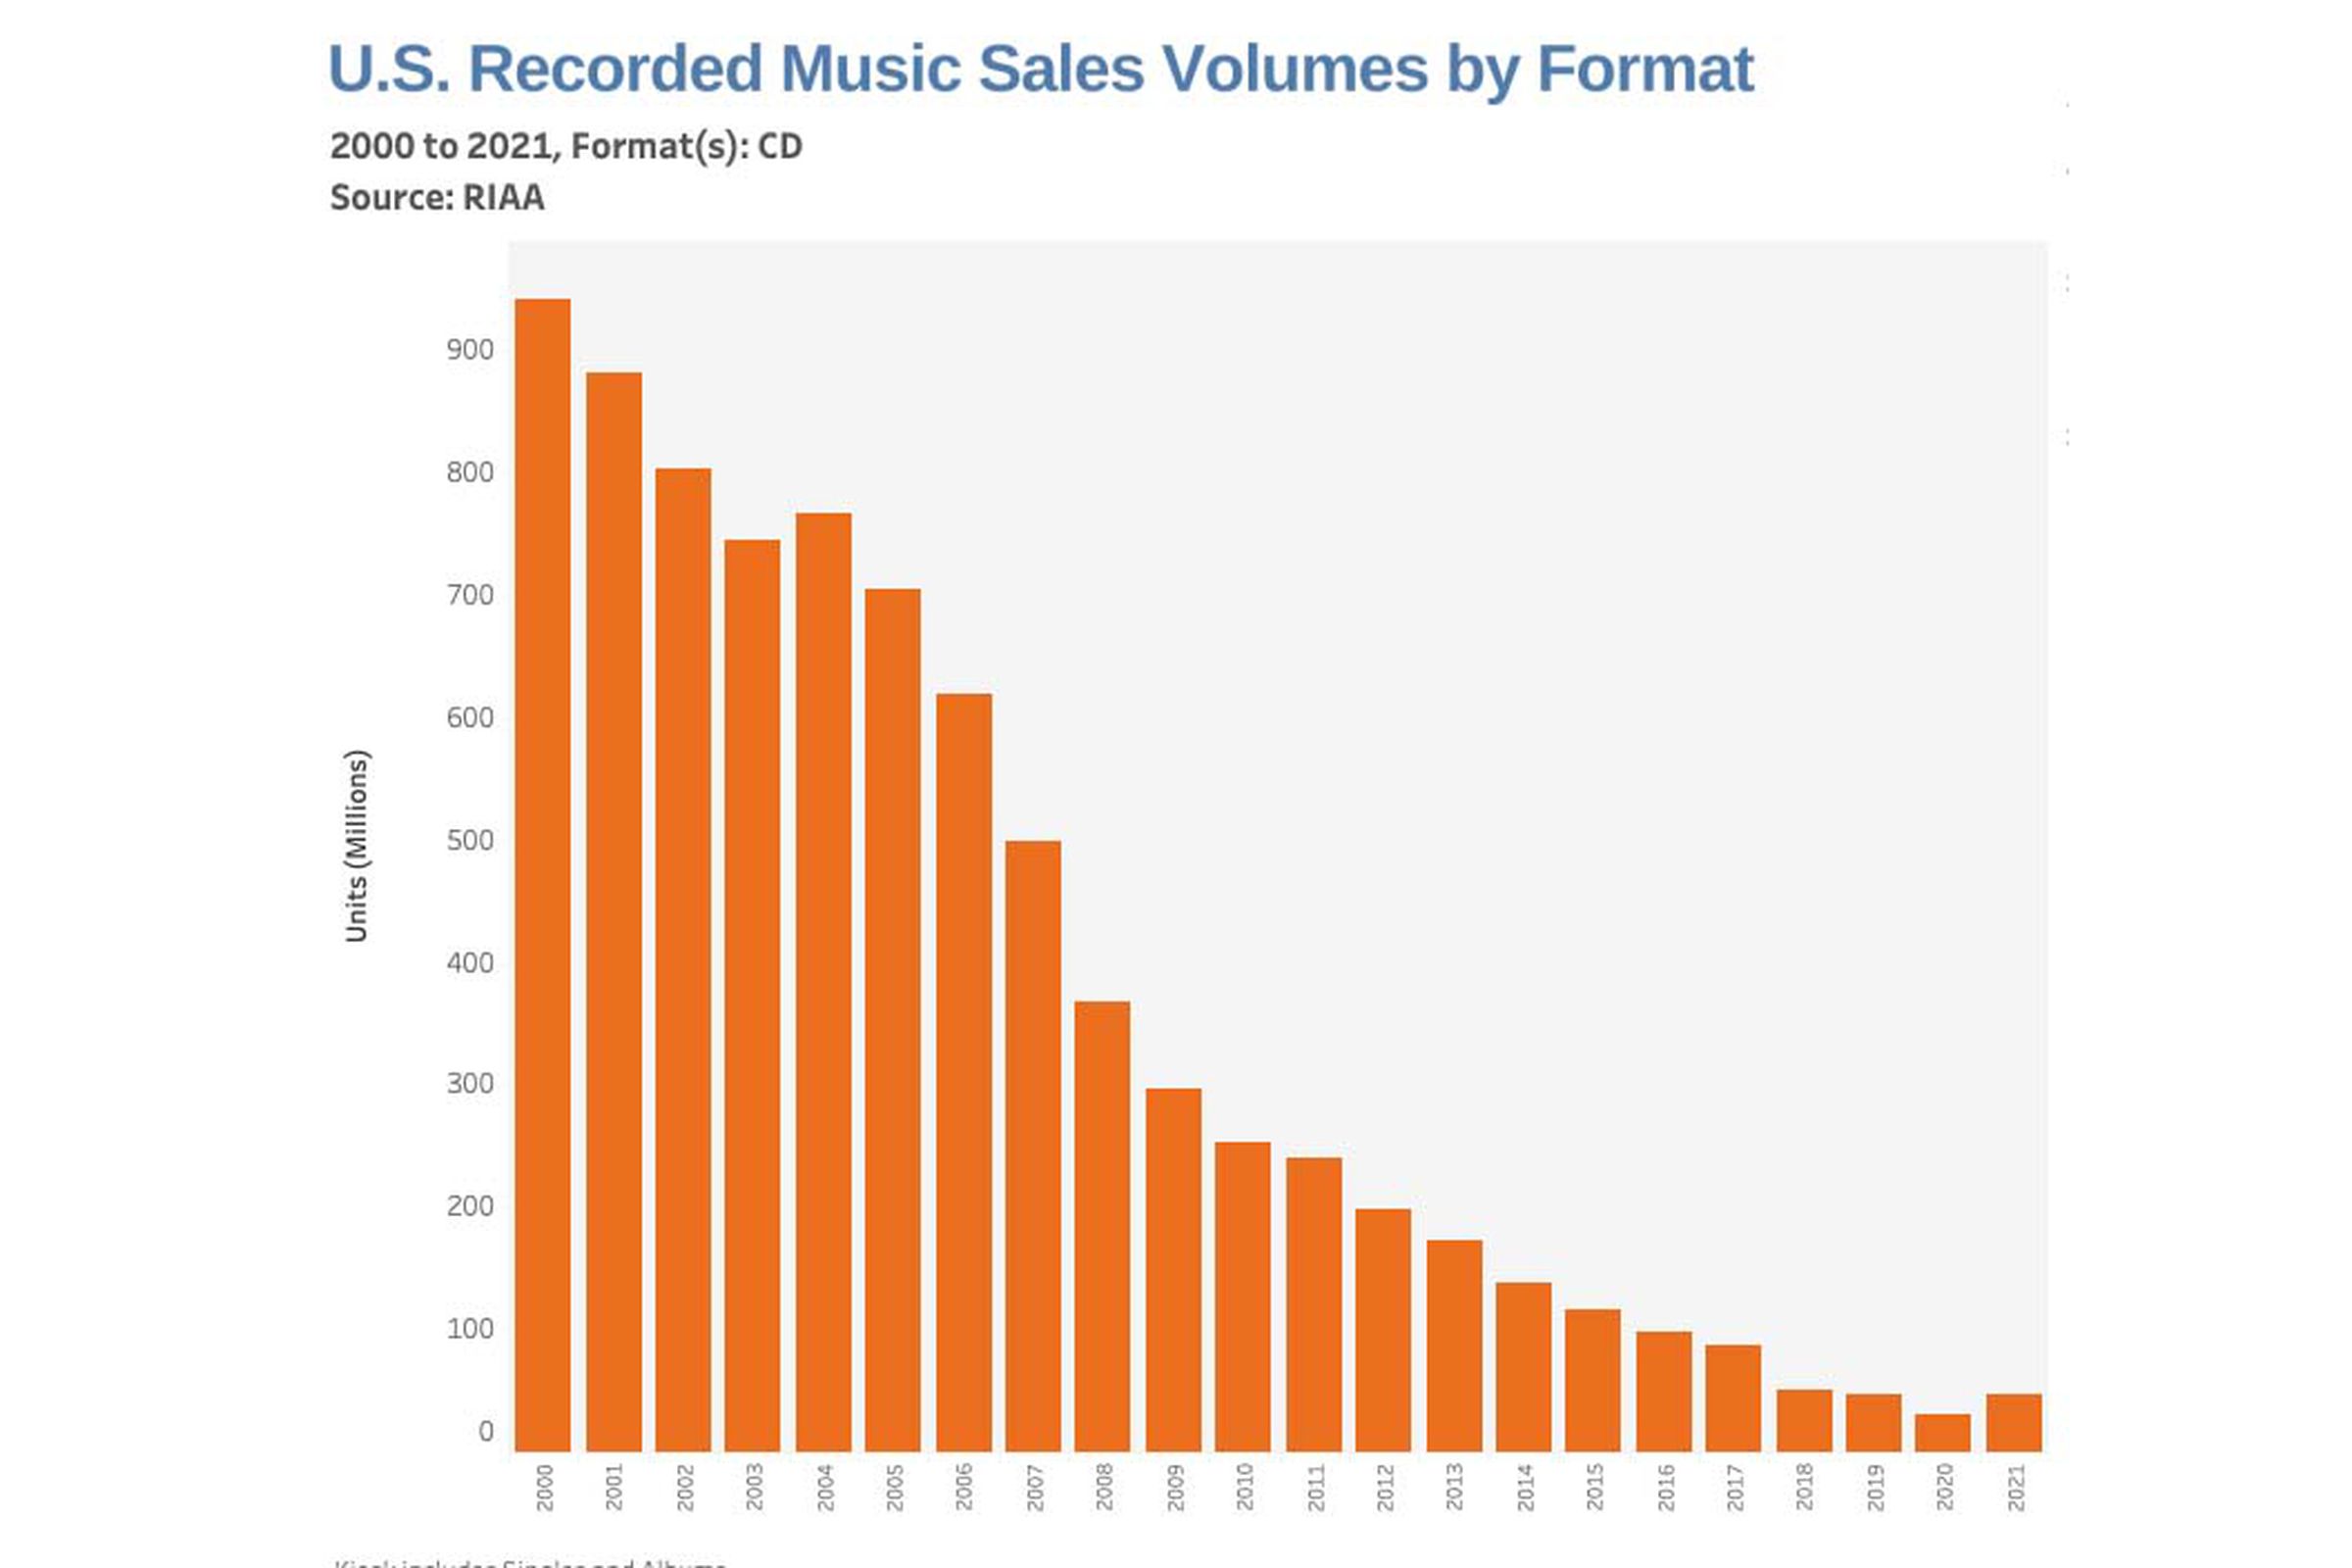 In the US, CD sales increased for the first time since 2004.